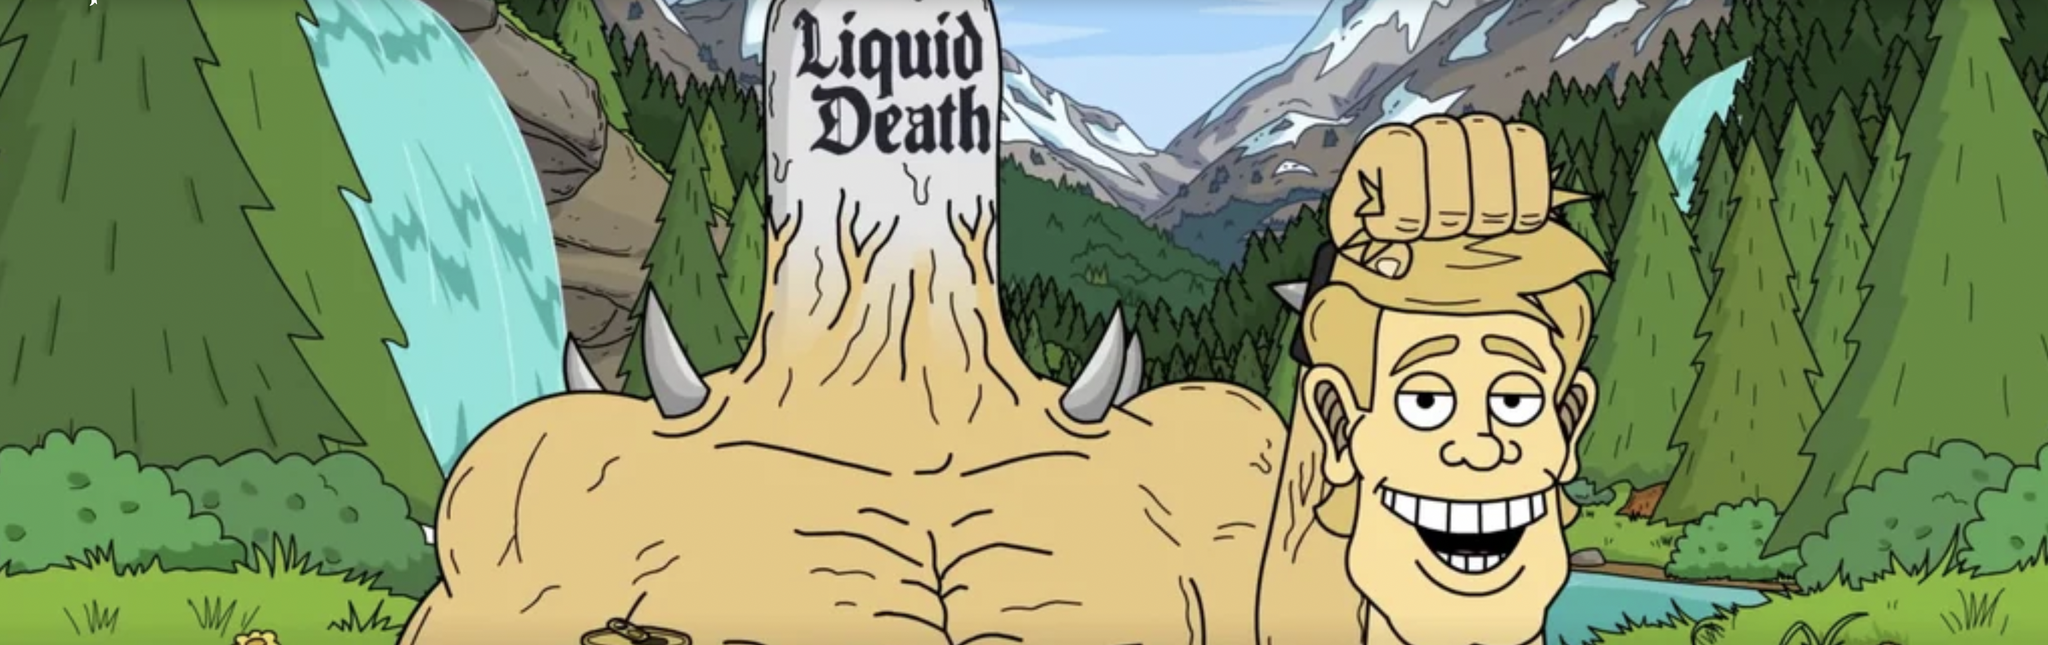 Liquid Death: canned water with a punk identity